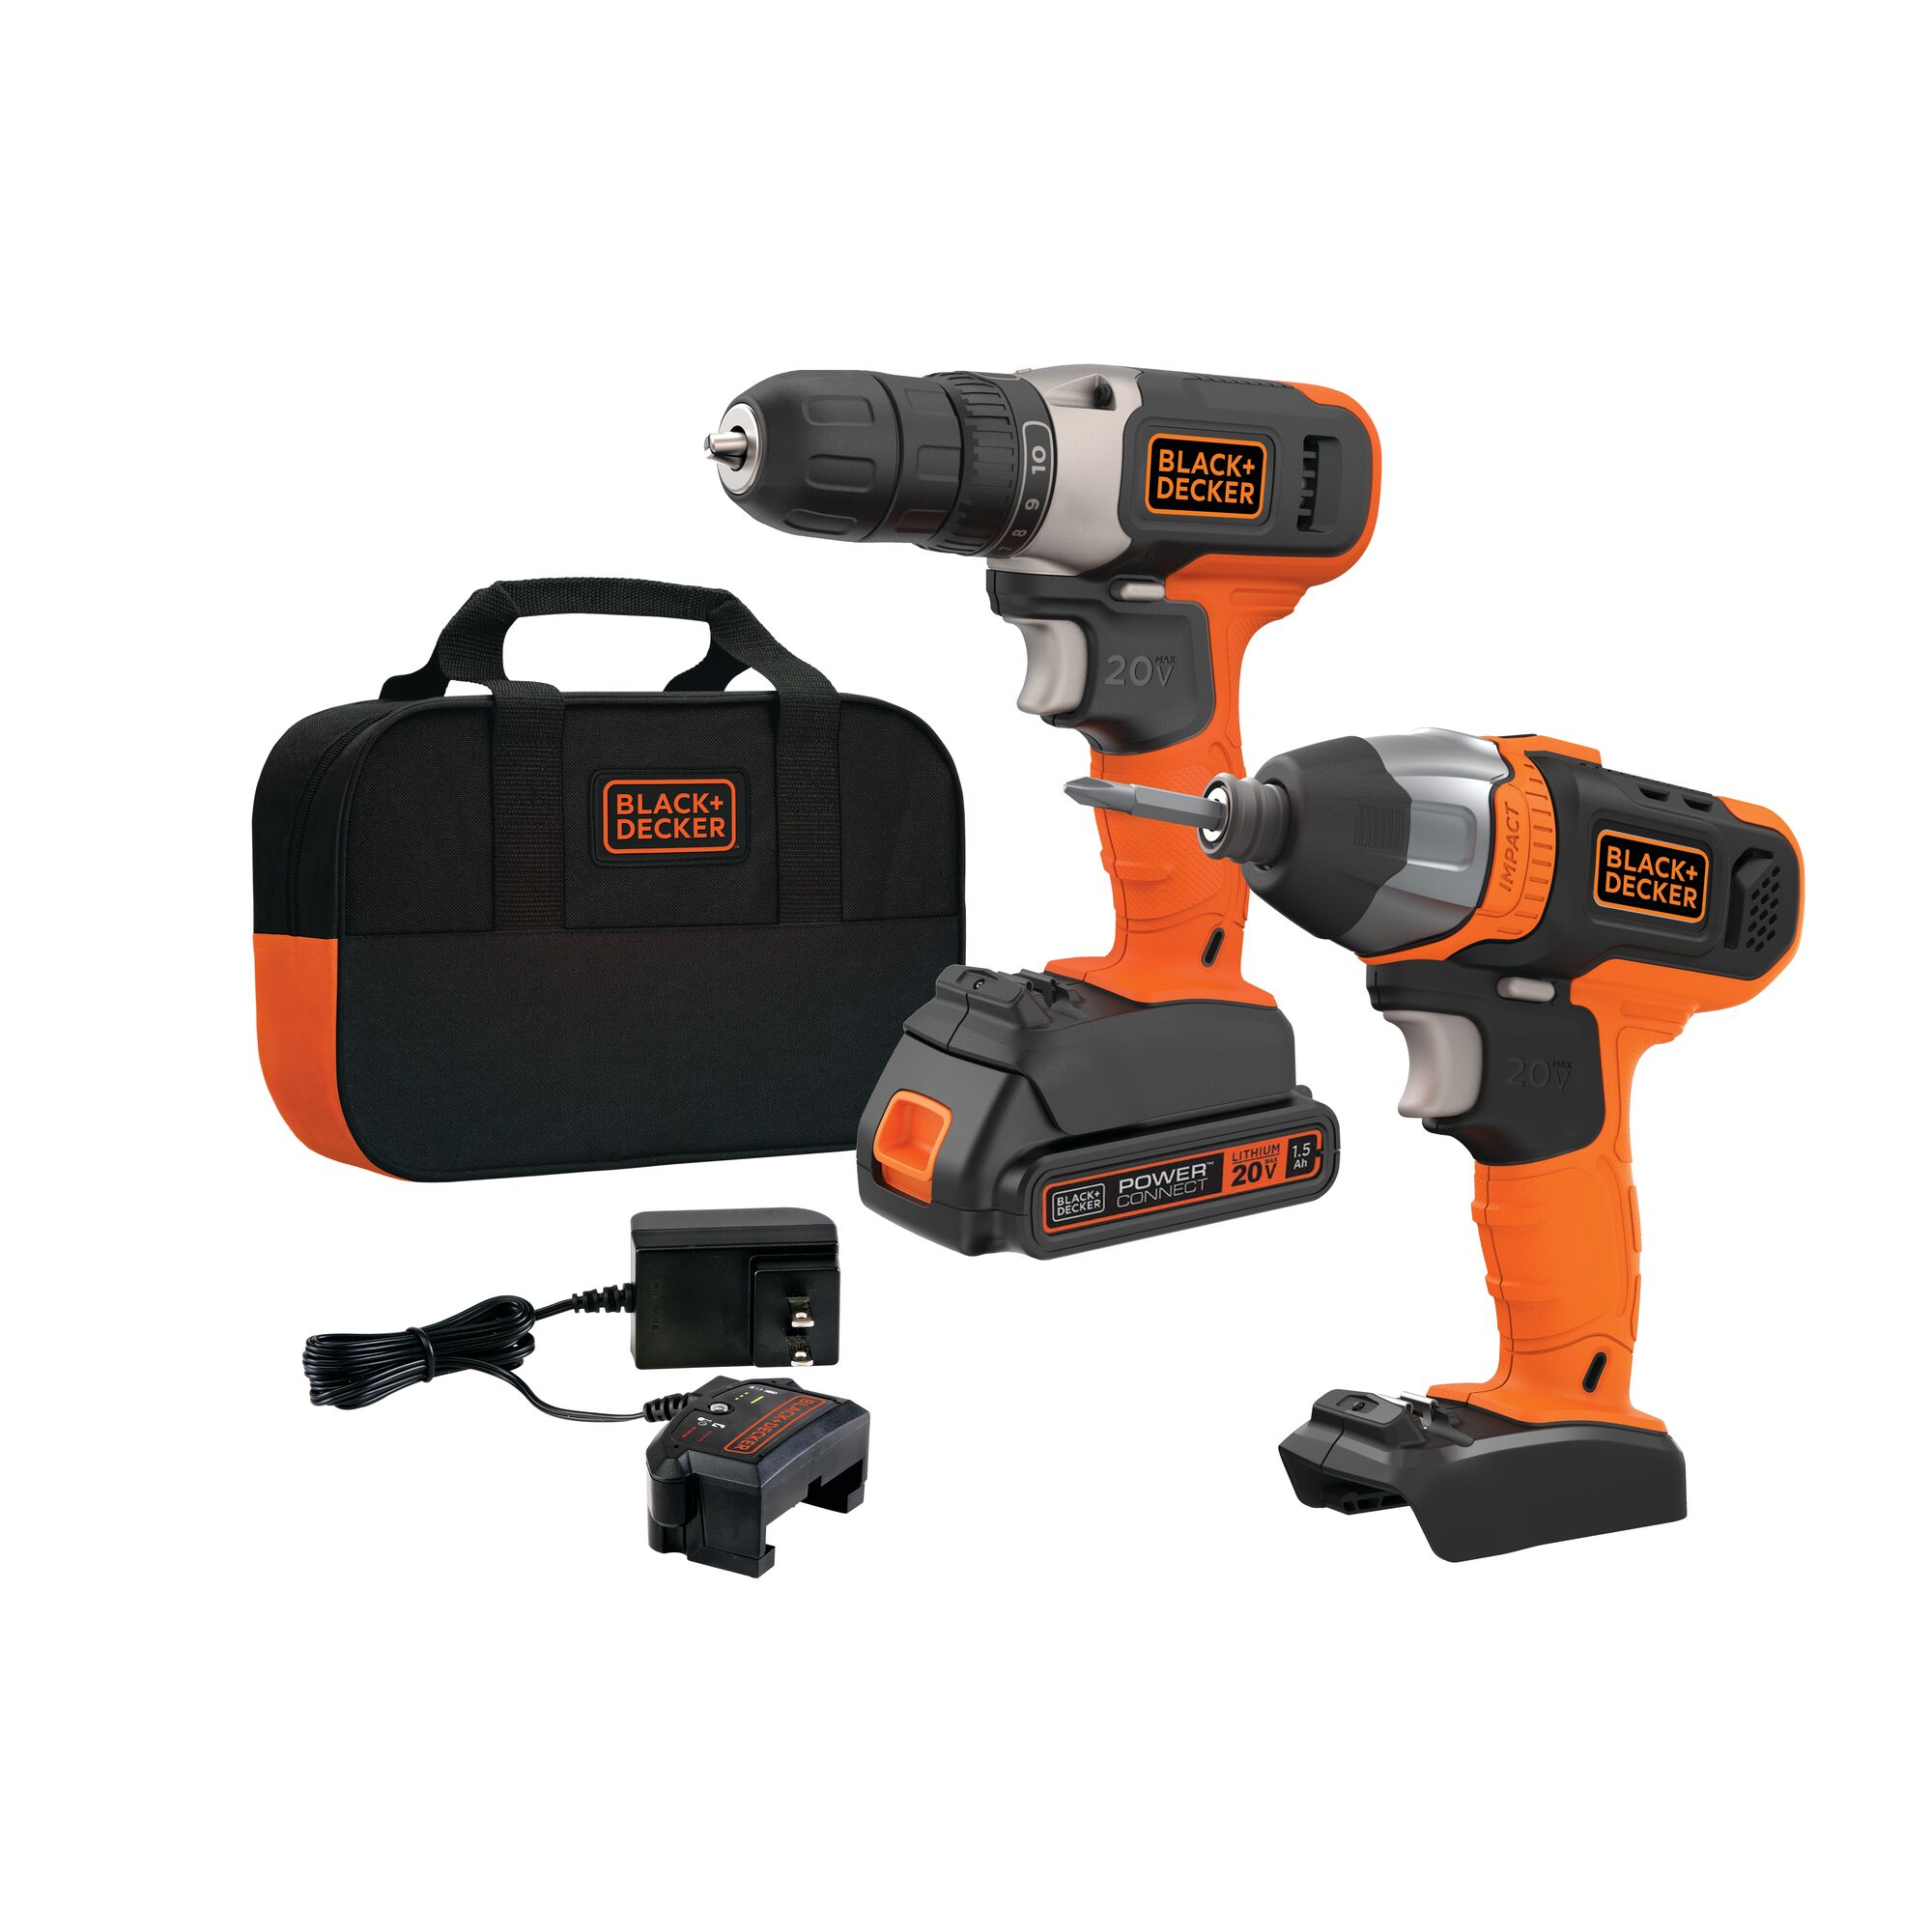 Lithium ion drill and driver plus impact combo kit.